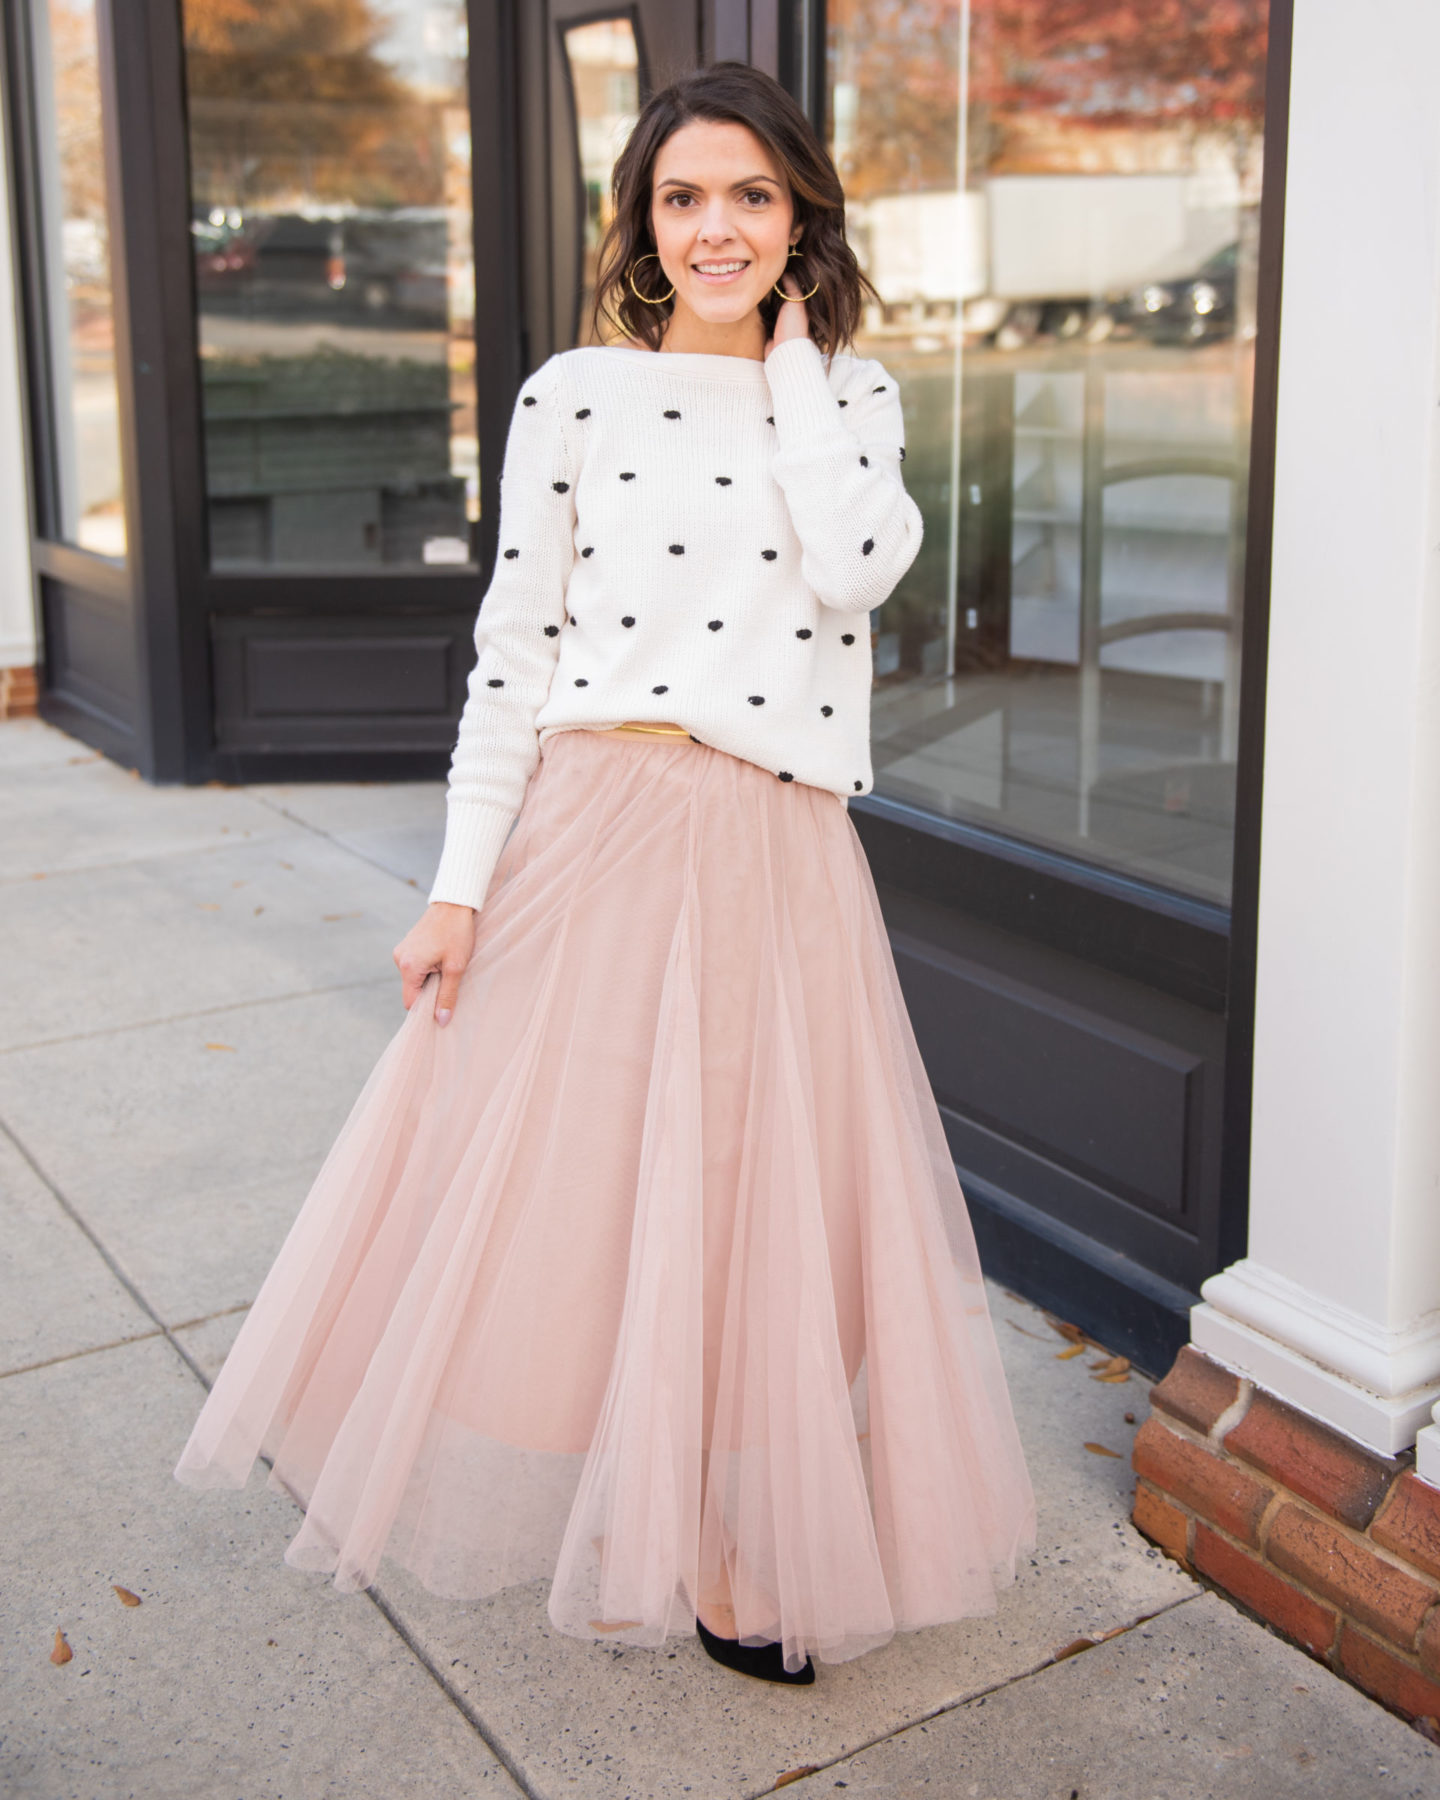 3 Ways To Style A Tulle Skirt The Sarah Stories 1190